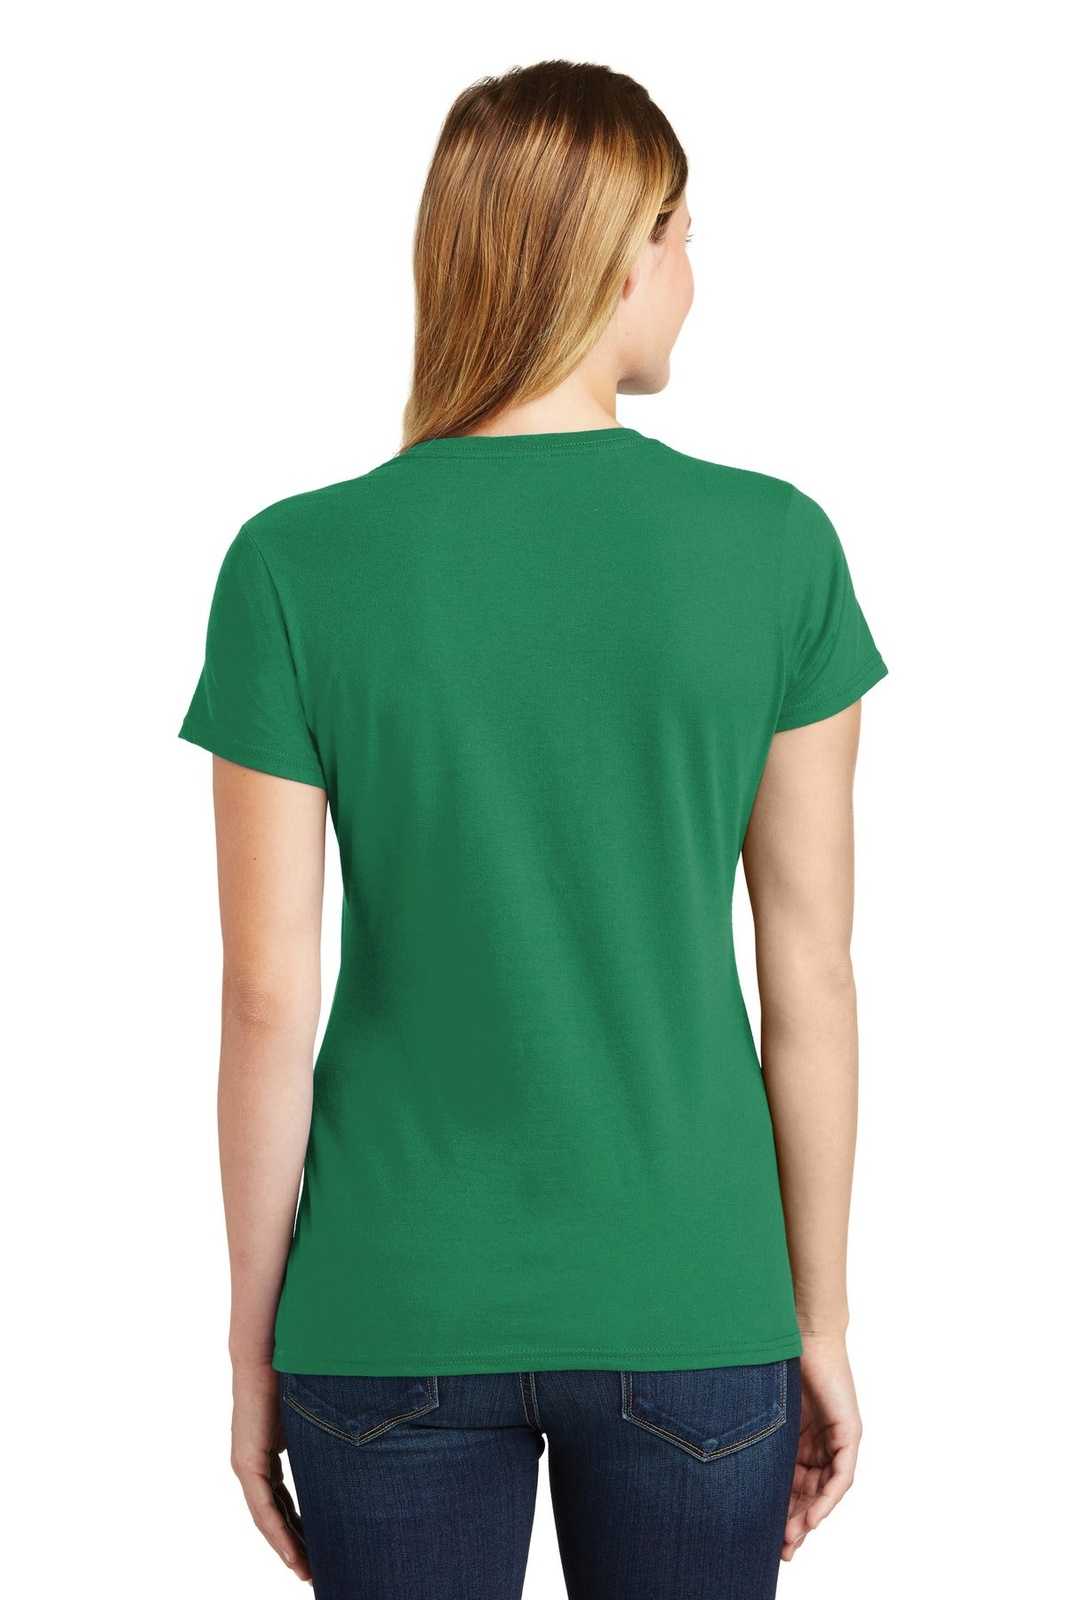 Port &amp; Company LPC450 Ladies Fan Favorite Tee - Athletic Kelly - HIT a Double - 2